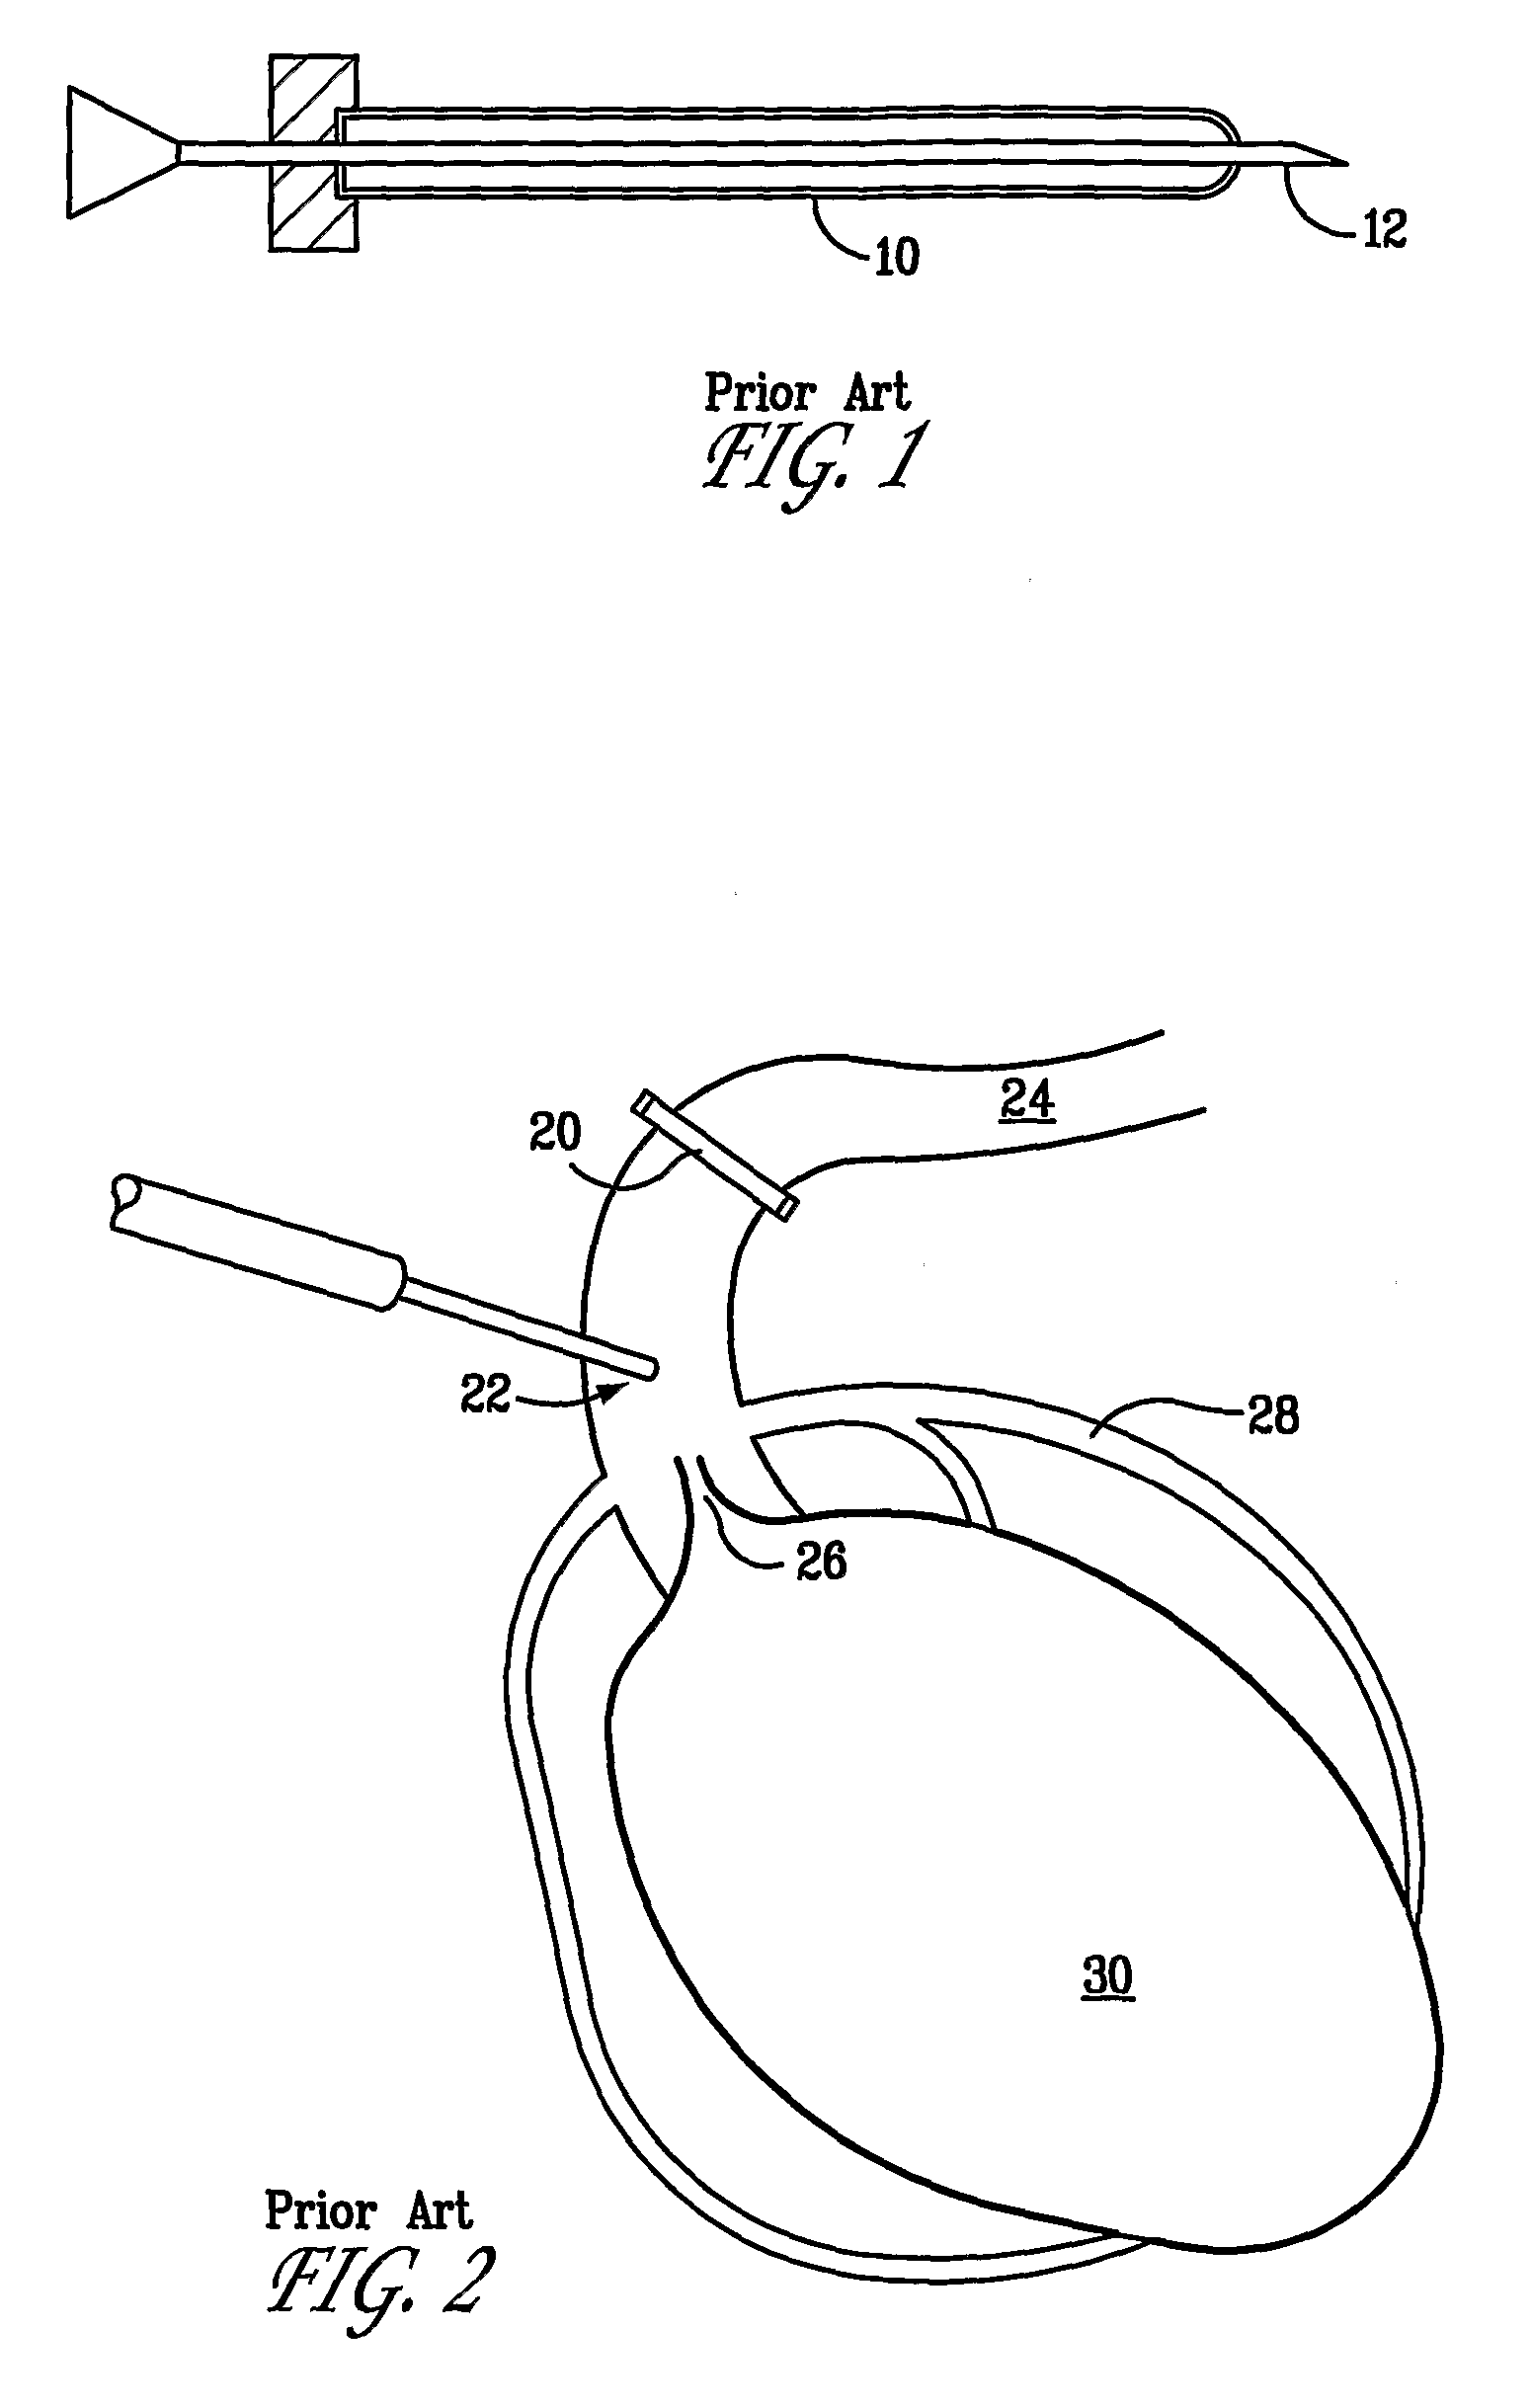 Device for facilitating cardioplegia delivery in patients with aortic insufficiency